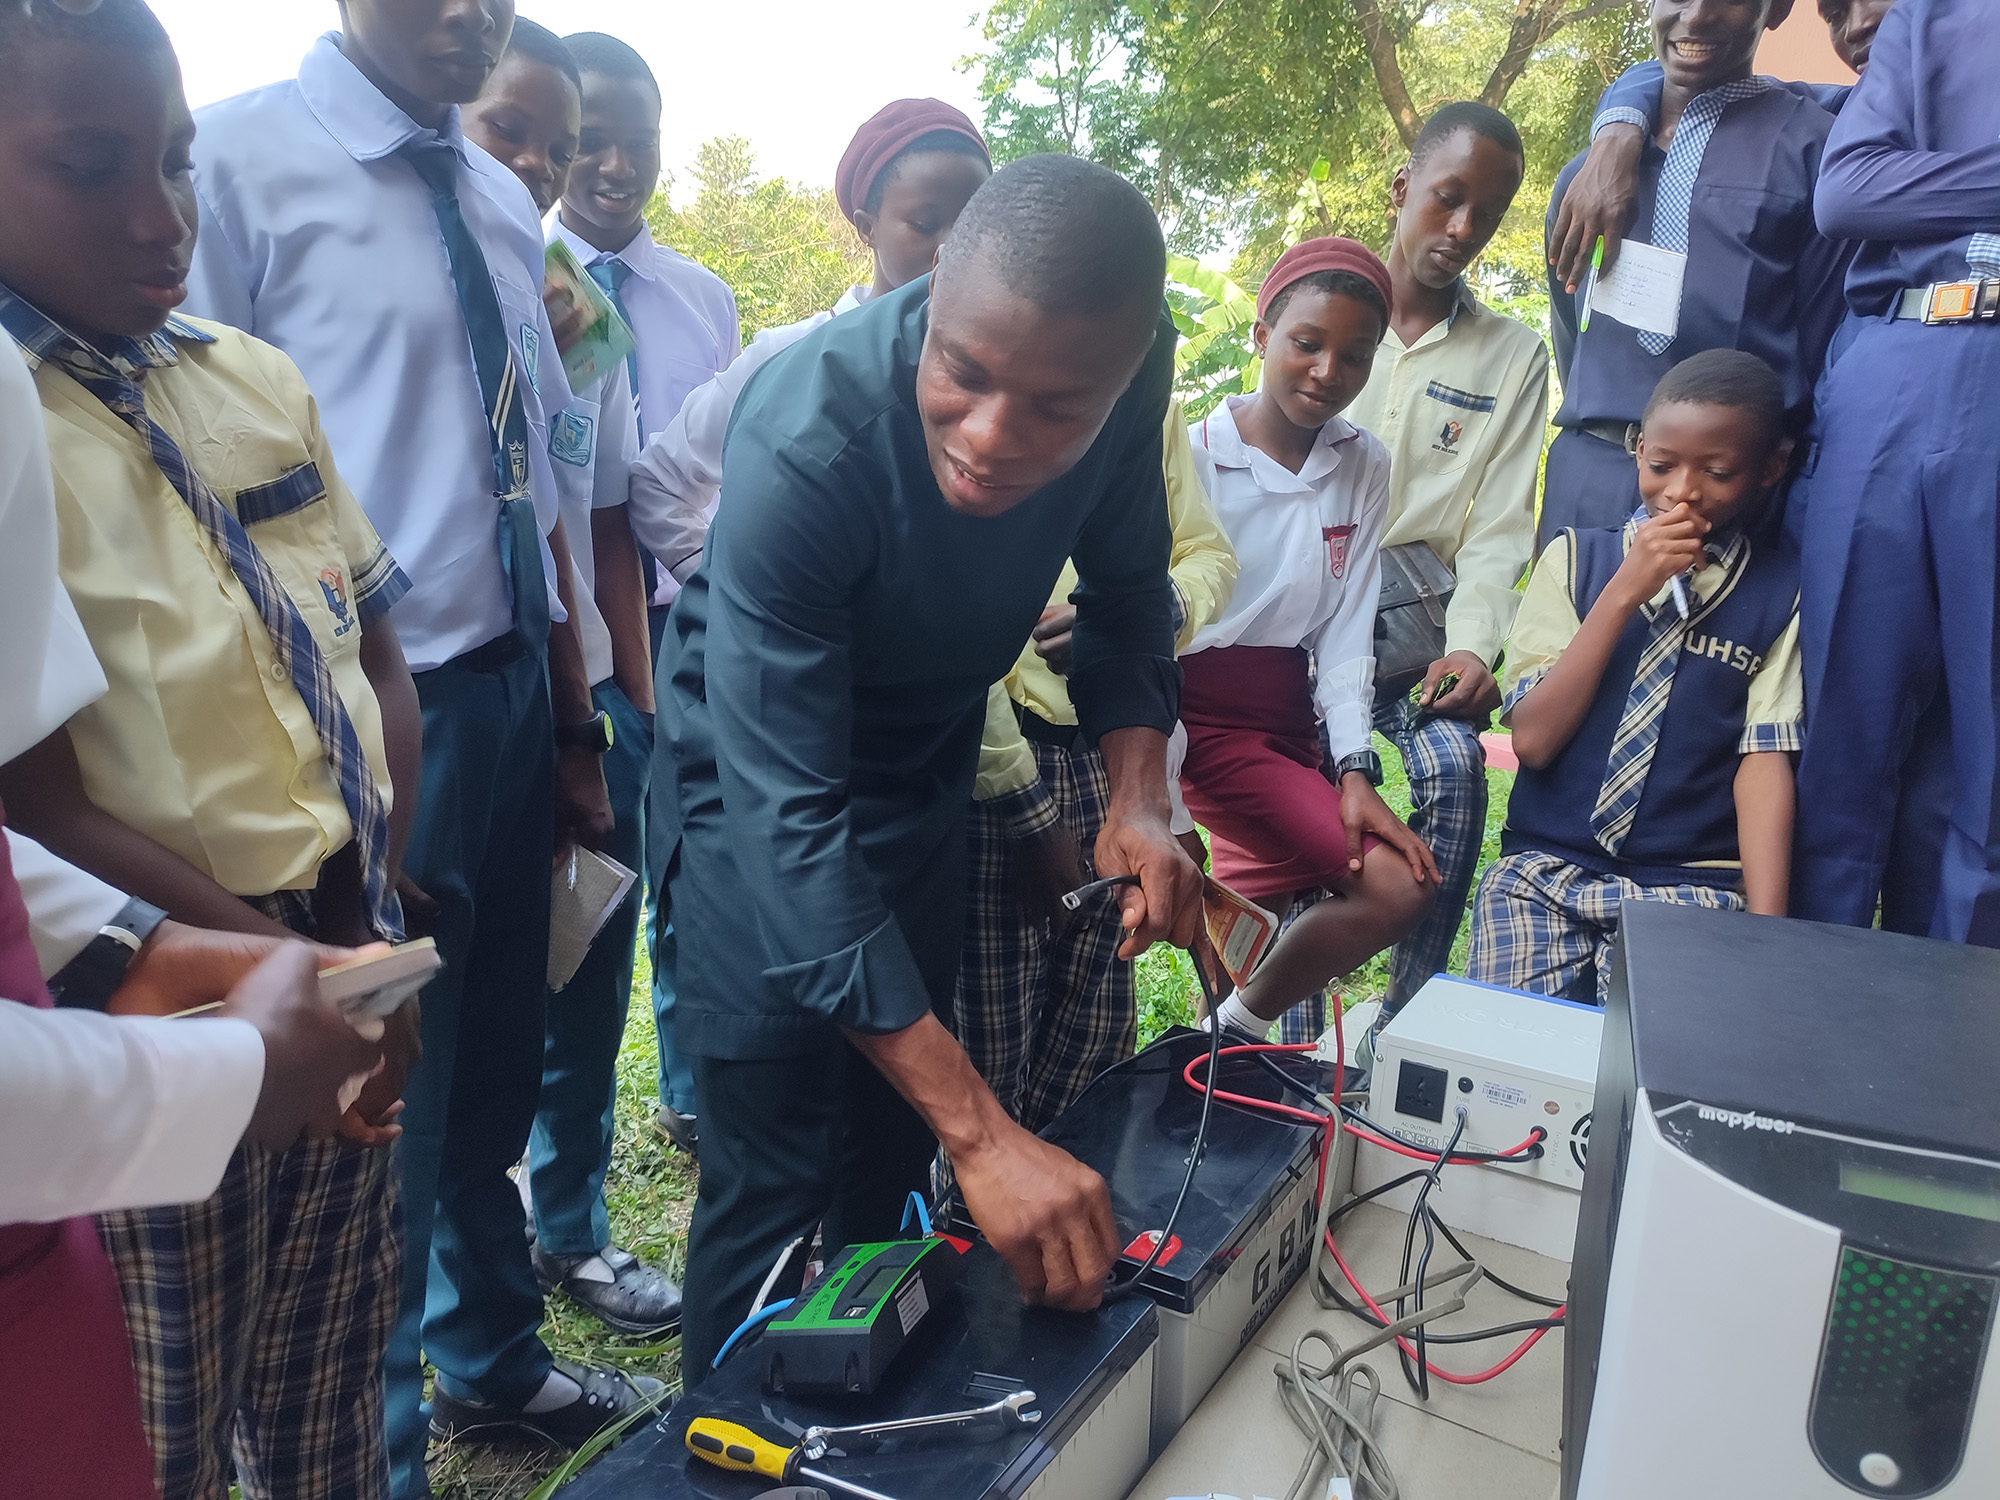 Our expert instructor guiding the students through the process of installing solar panels and emphasizing the importance of renewable energy sources.